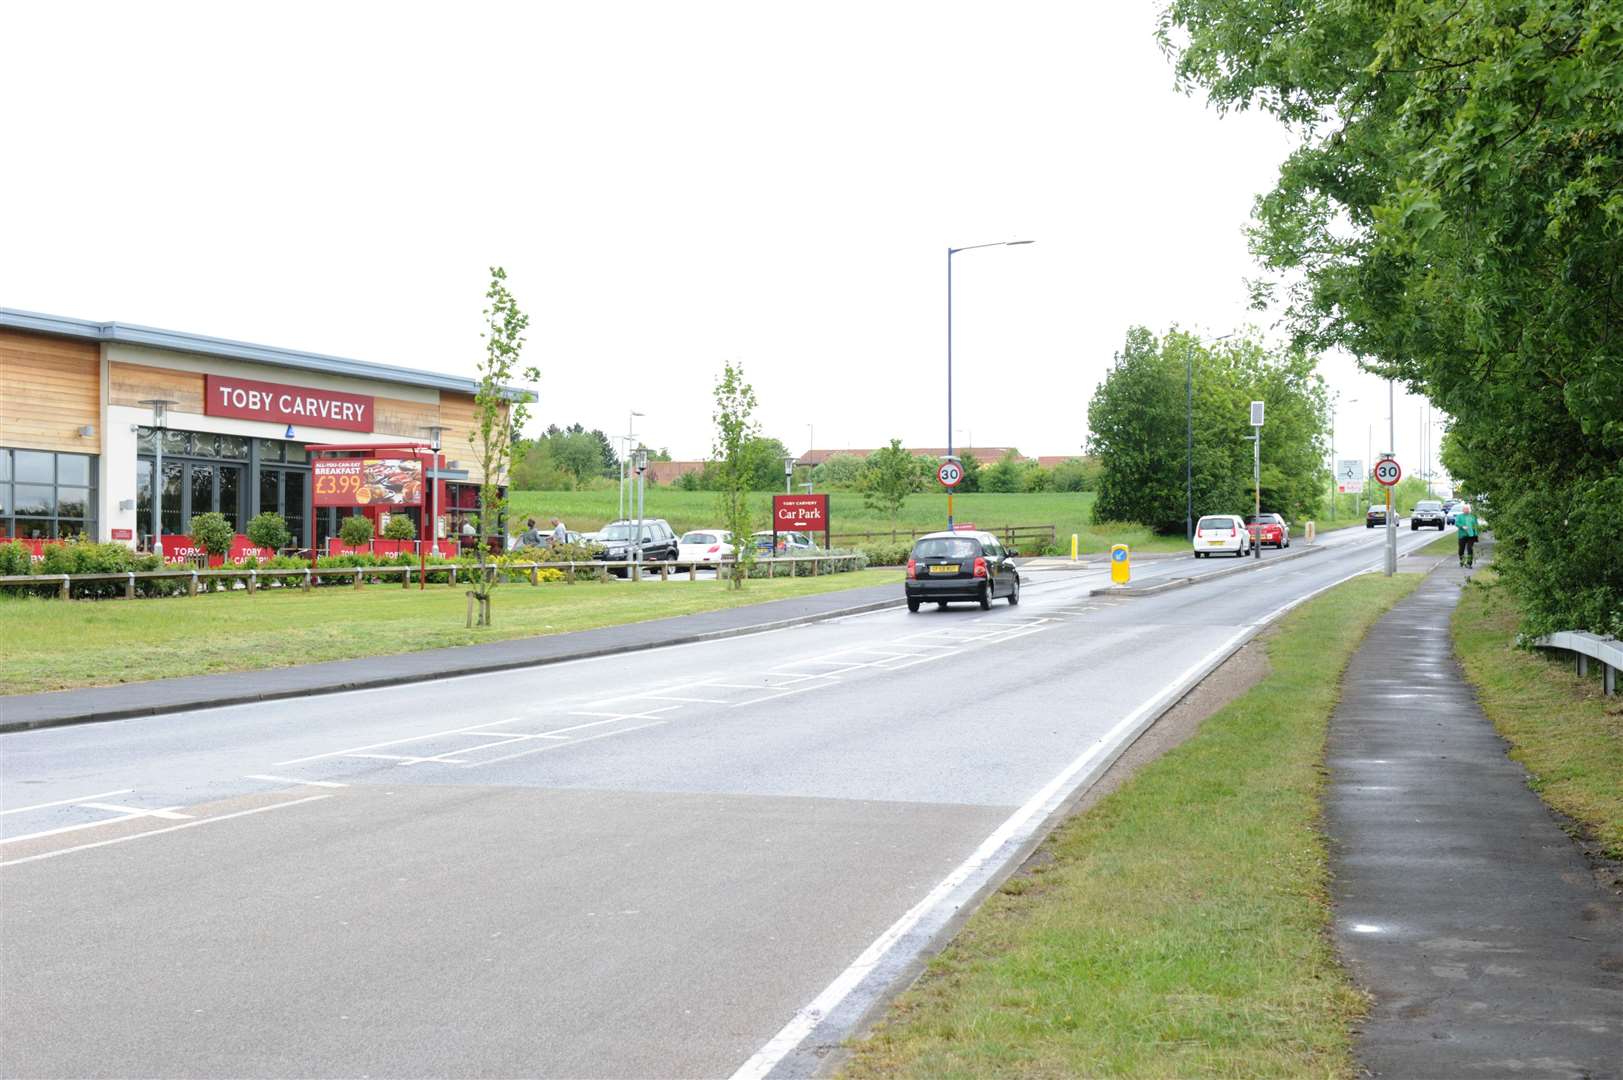 The Toby Carvery on Coldharbour Road, Northfleet